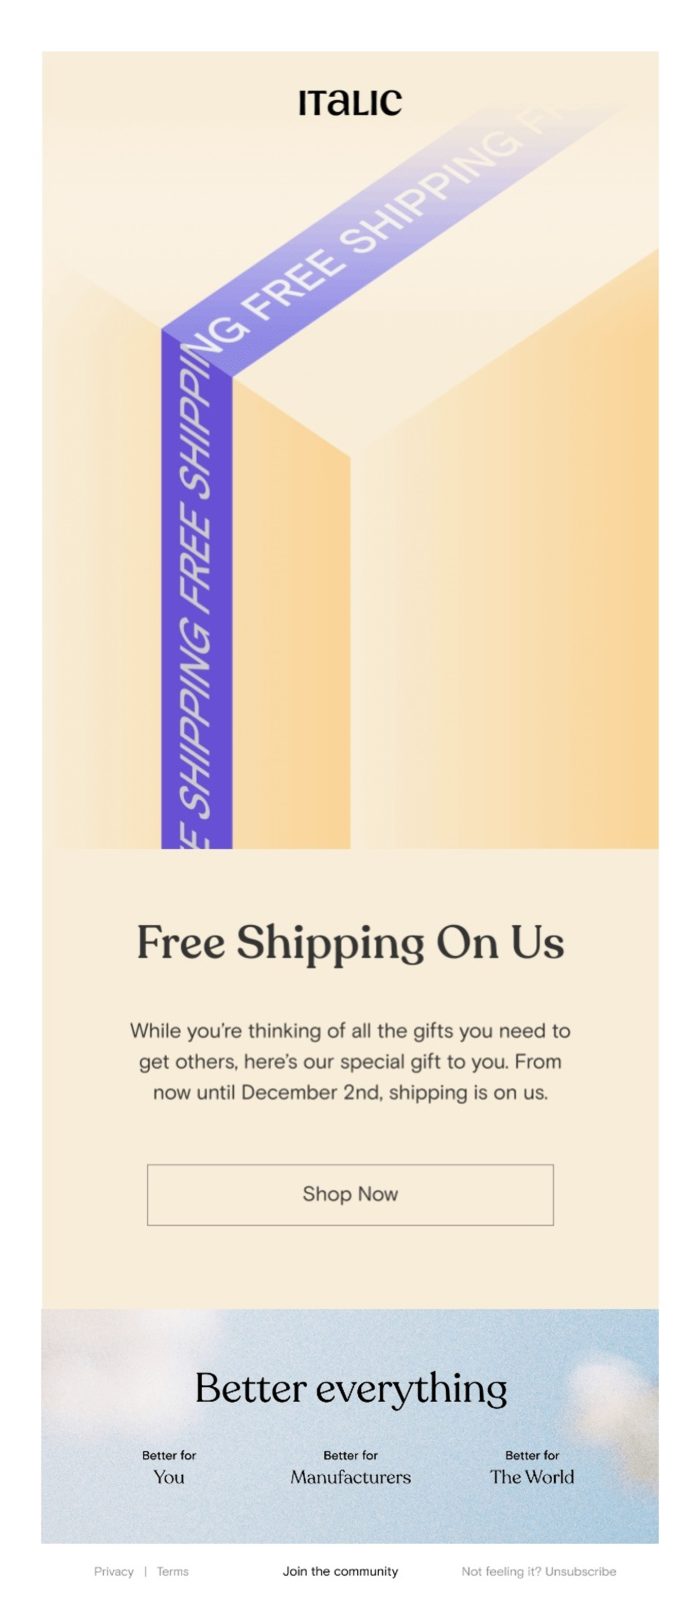 Holiday mobile marketing with free shipping.